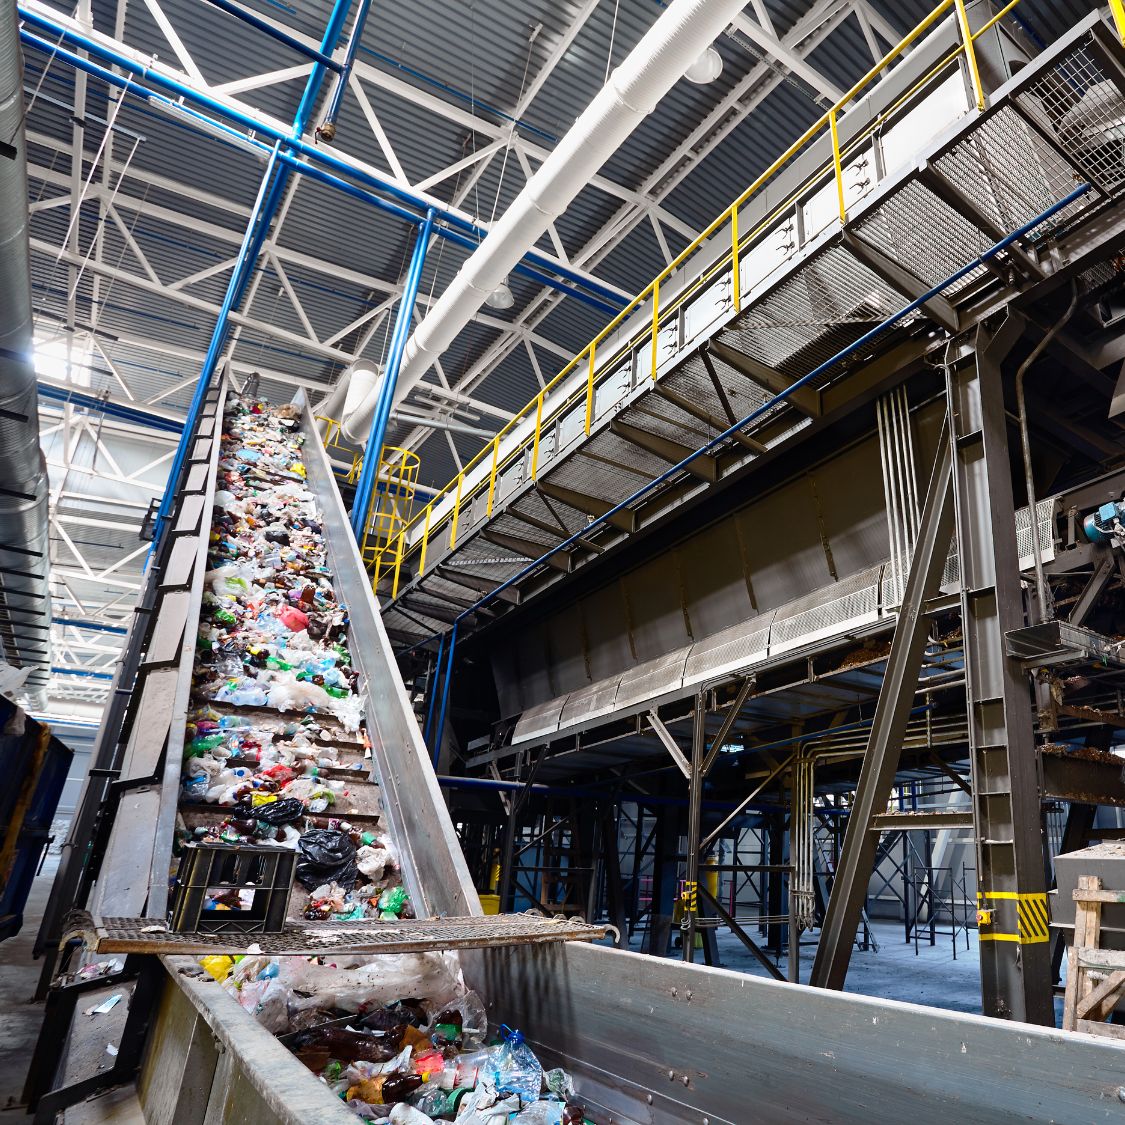 Industrial Waste: Ways To Reduce, Reuse, and Recycle